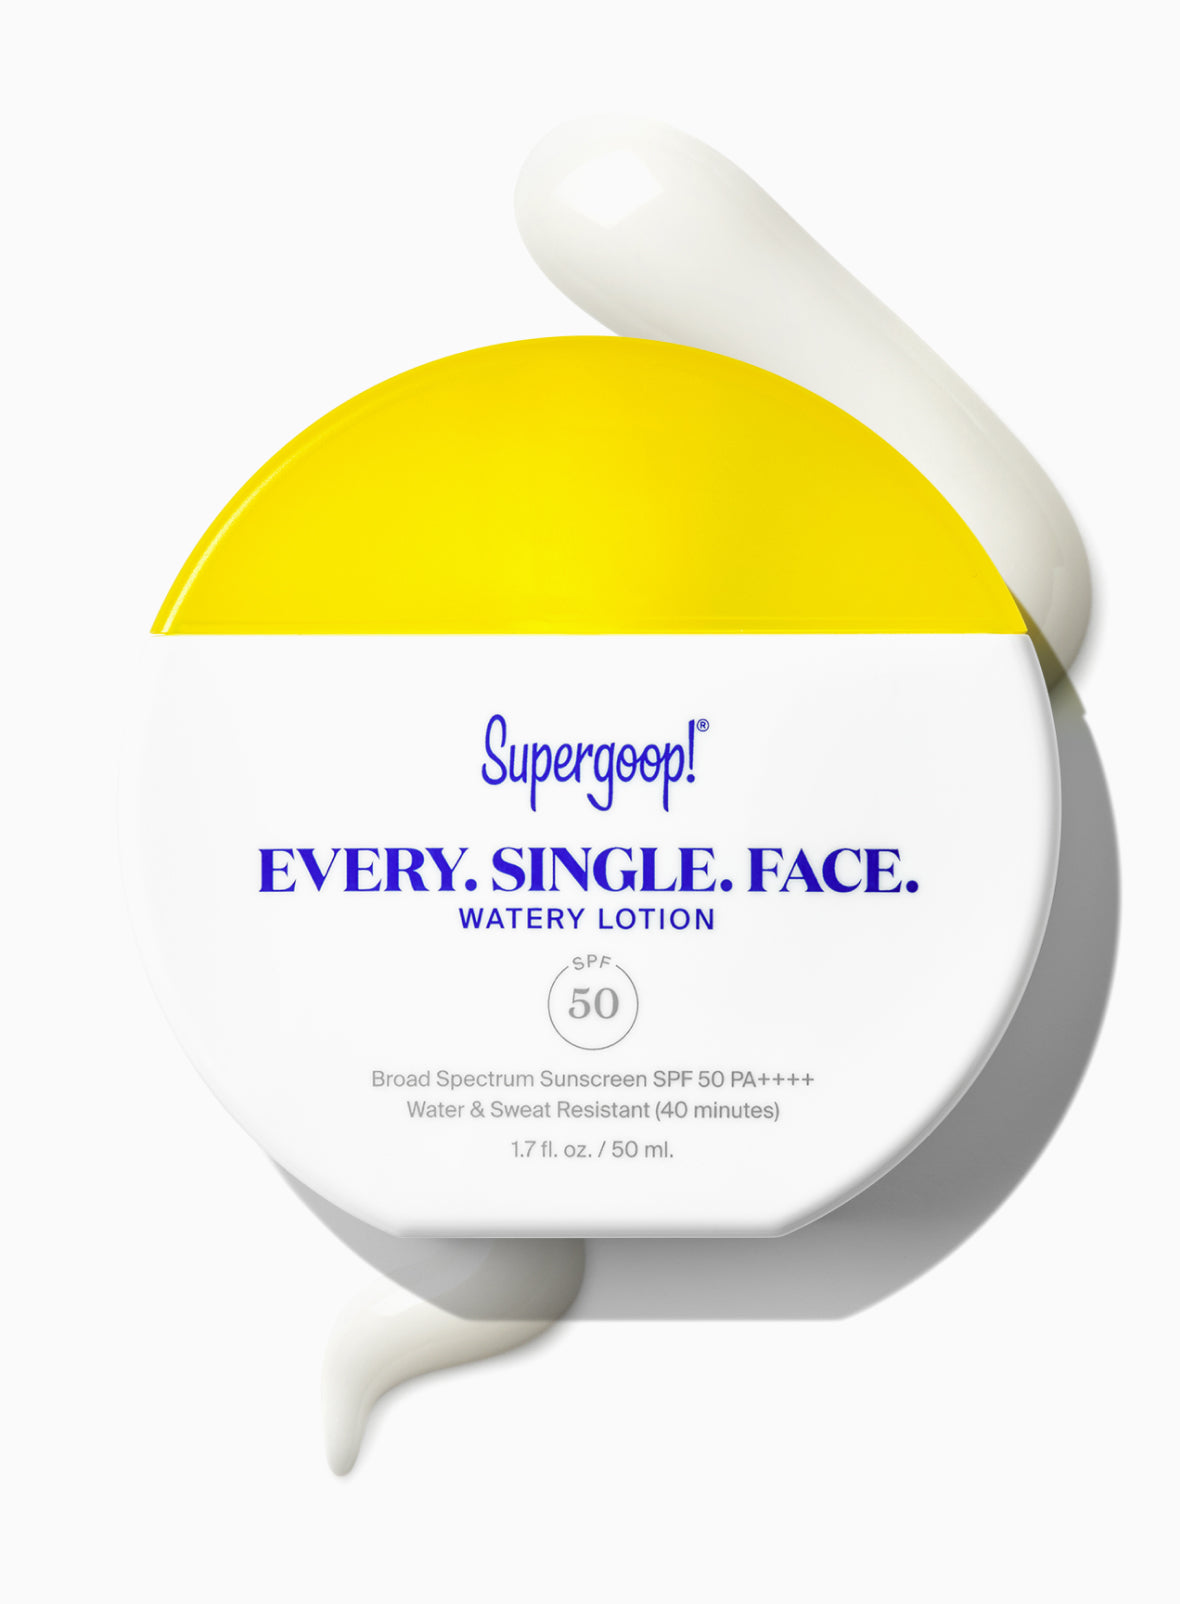 Every. Single. Face. Watery Lotion SPF 50 Sunscreen 1.7 fl. oz. | Supergoop!